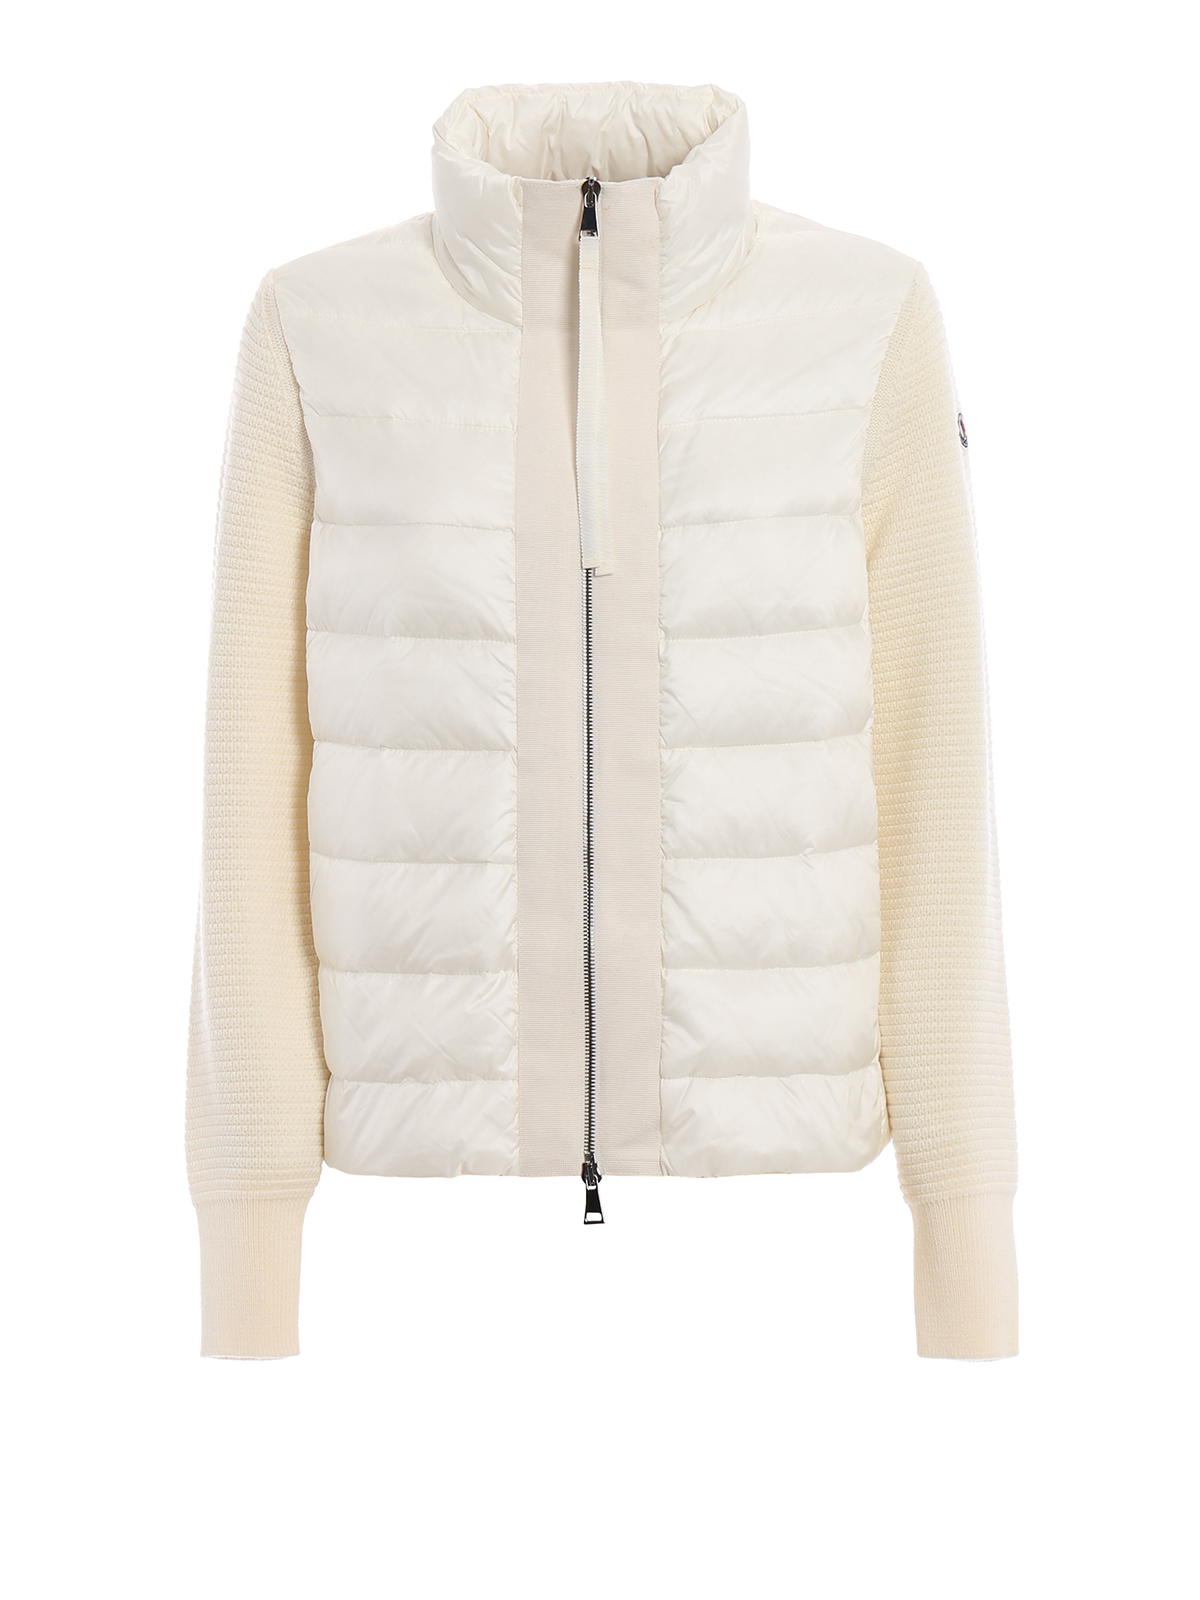 Moncler - Knit wool sleeved puffer jacket - padded jackets ...